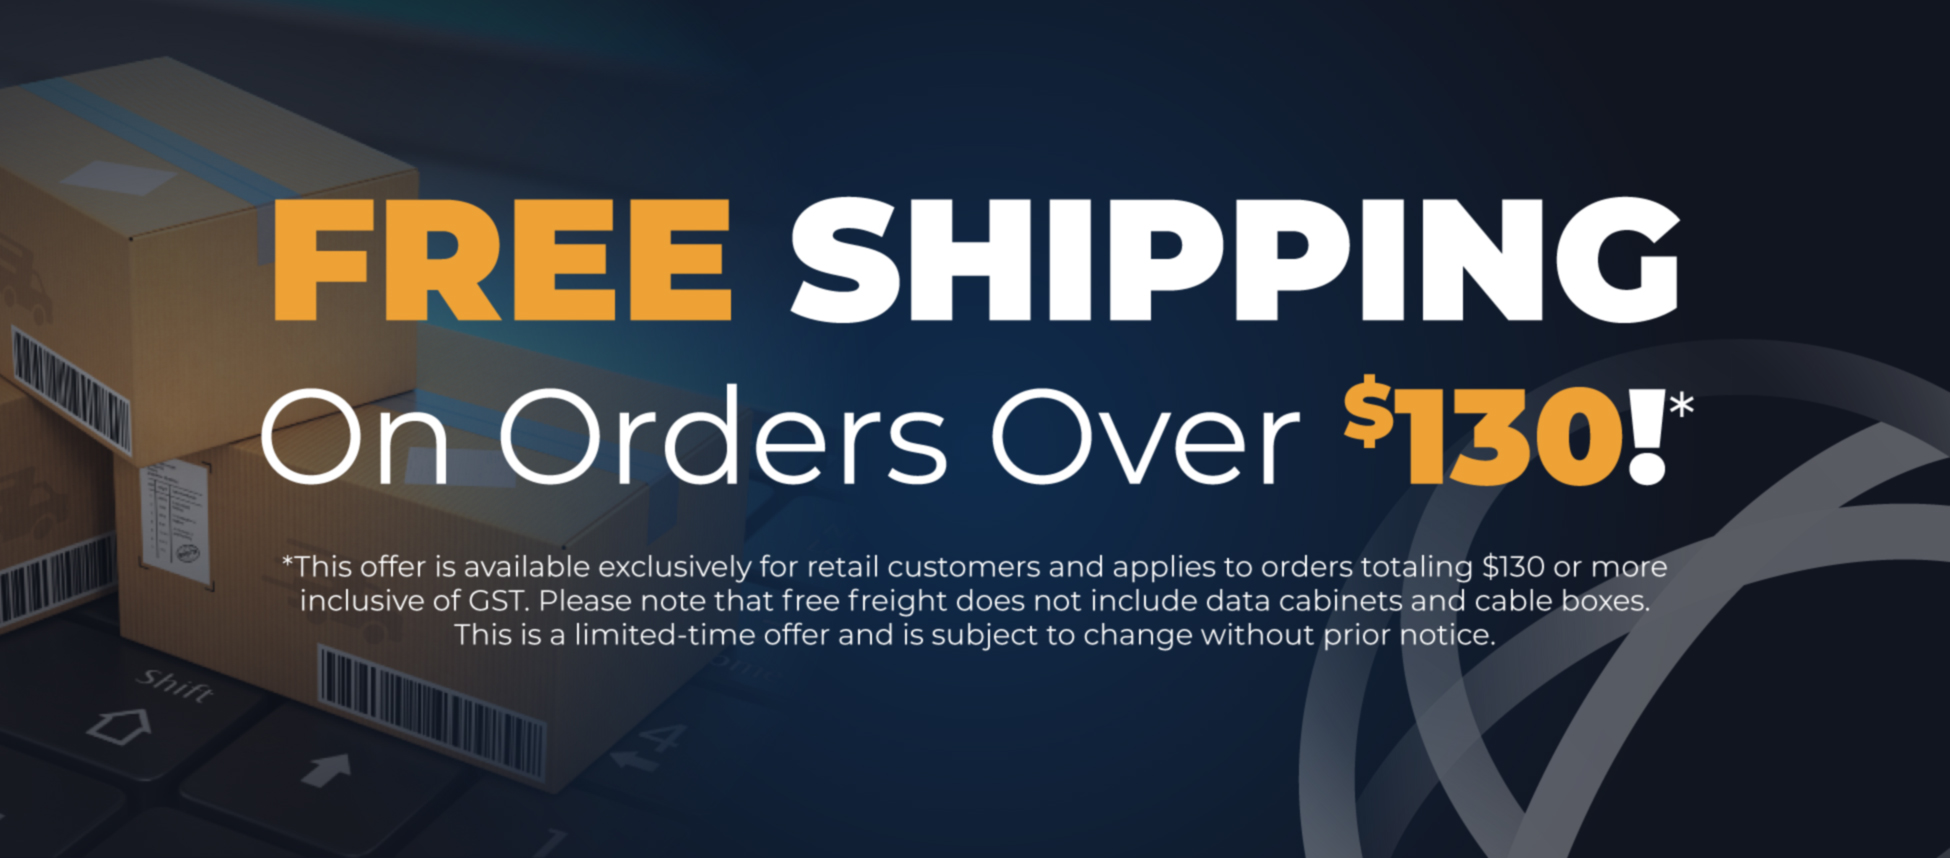 Free Shipping on Orders over $130!